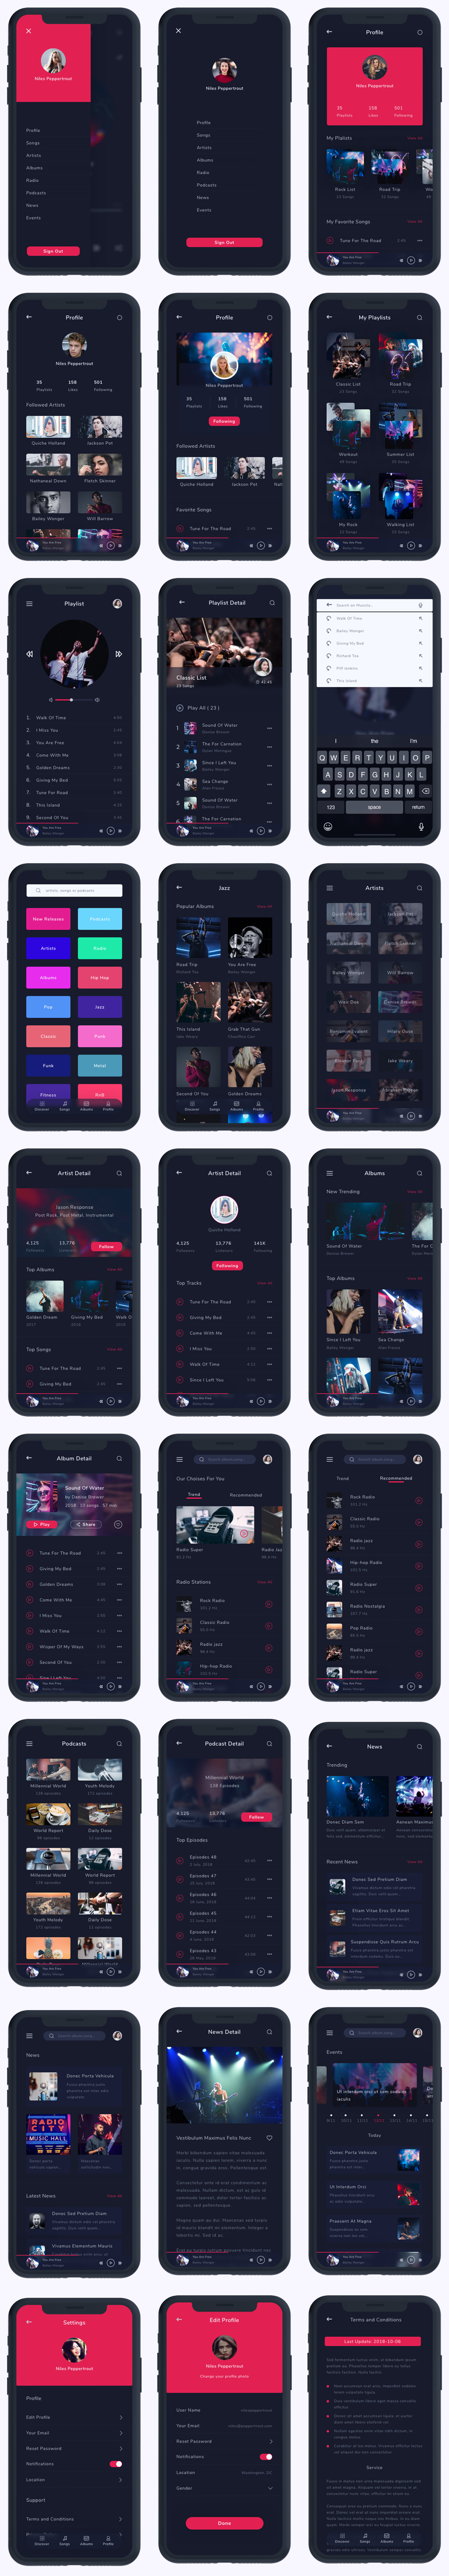 Moart - Music and Podcast App UI Kit - 3